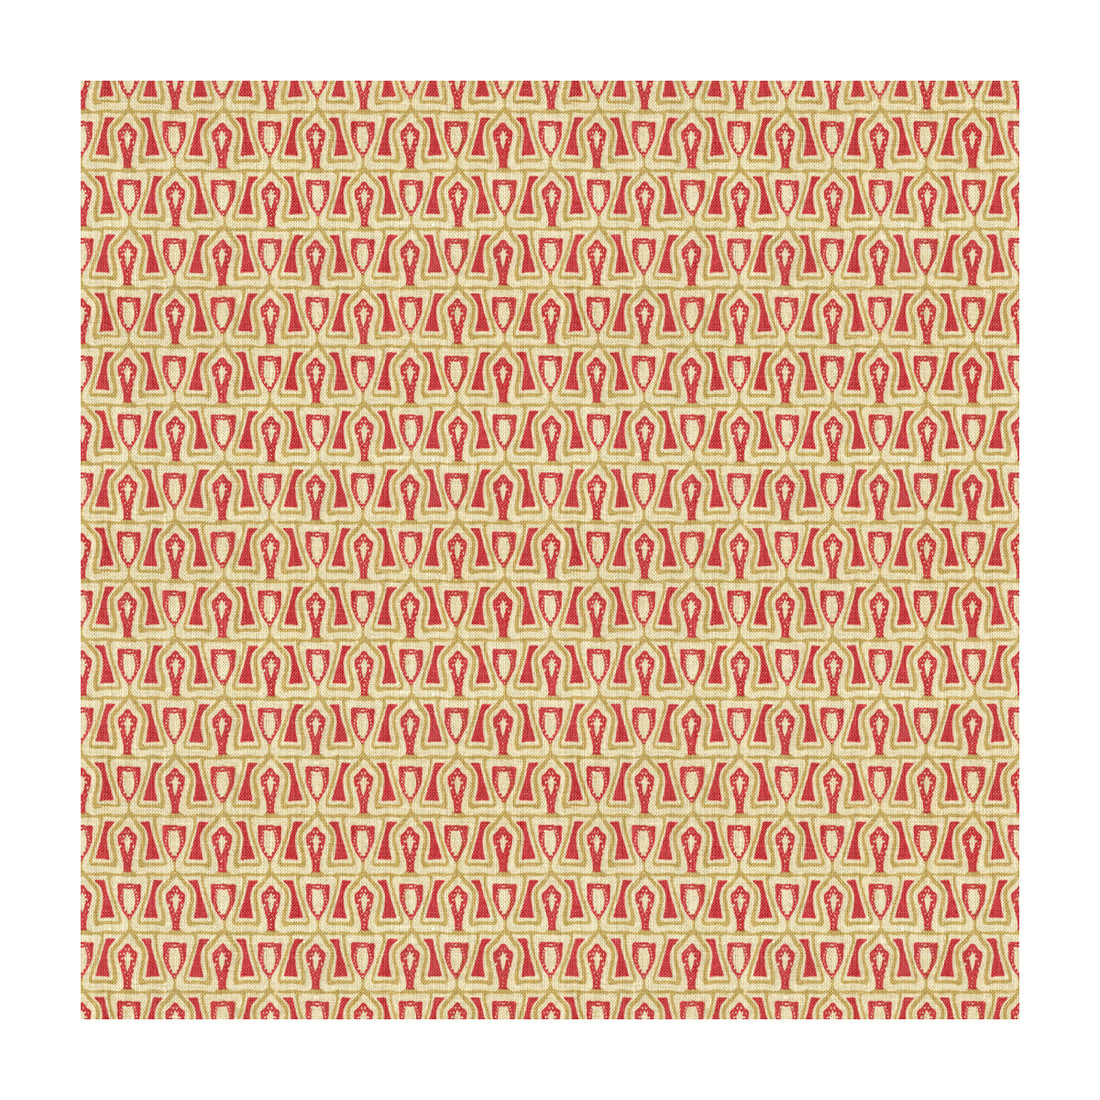 Passage fabric in cerise color - pattern GWF-3505.7.0 - by Lee Jofa Modern in the Allegra Hicks Garden collection